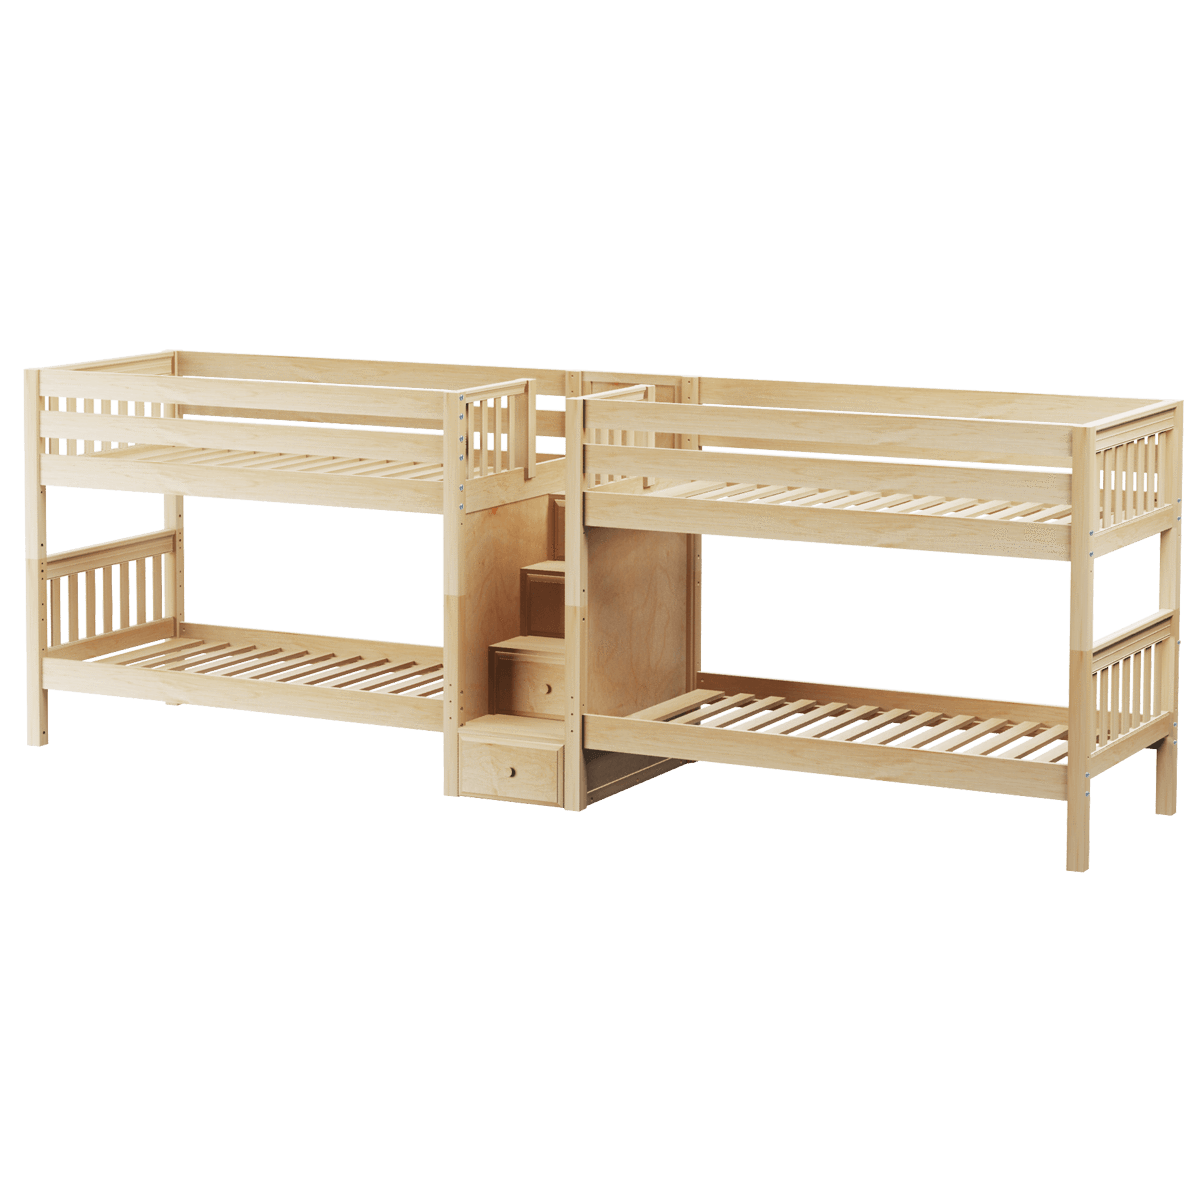 Maxtrix Twin XL Quadruple Bunk Bed with Stairs